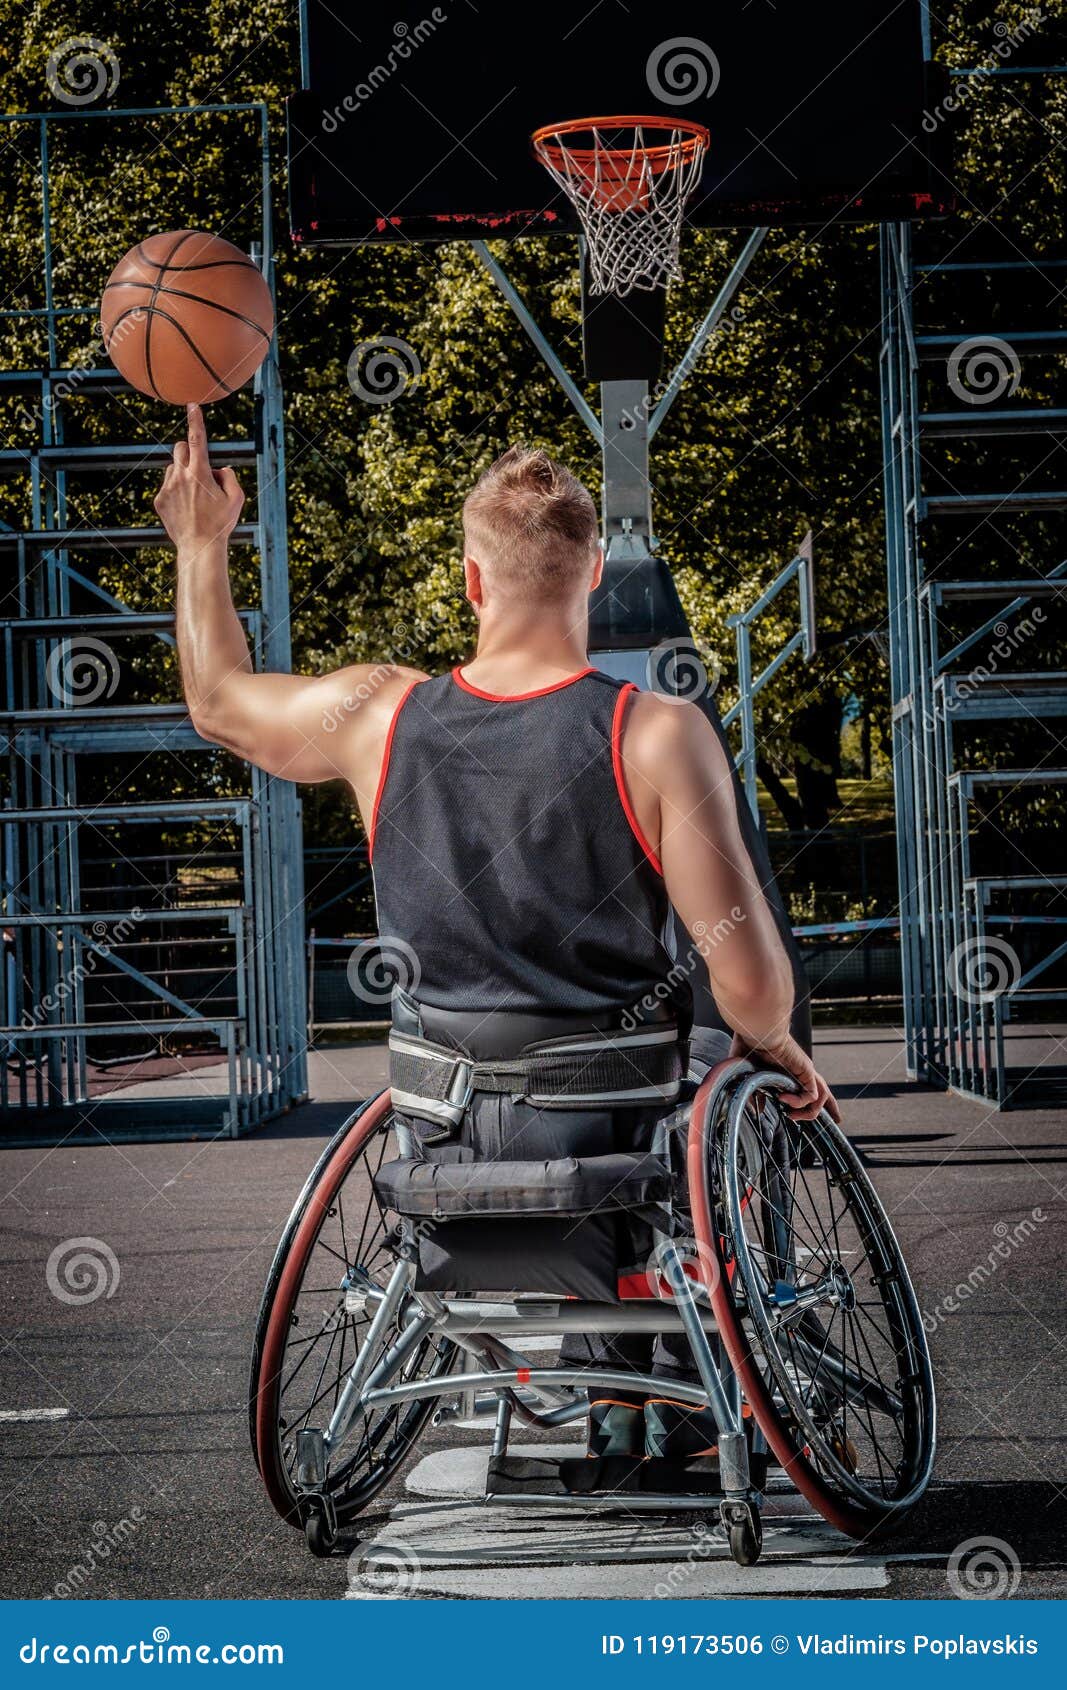 Professional Basketball Player Spinning Ball on His Finger on Studio  Background Stock Image - Image of play, fitness: 266651797